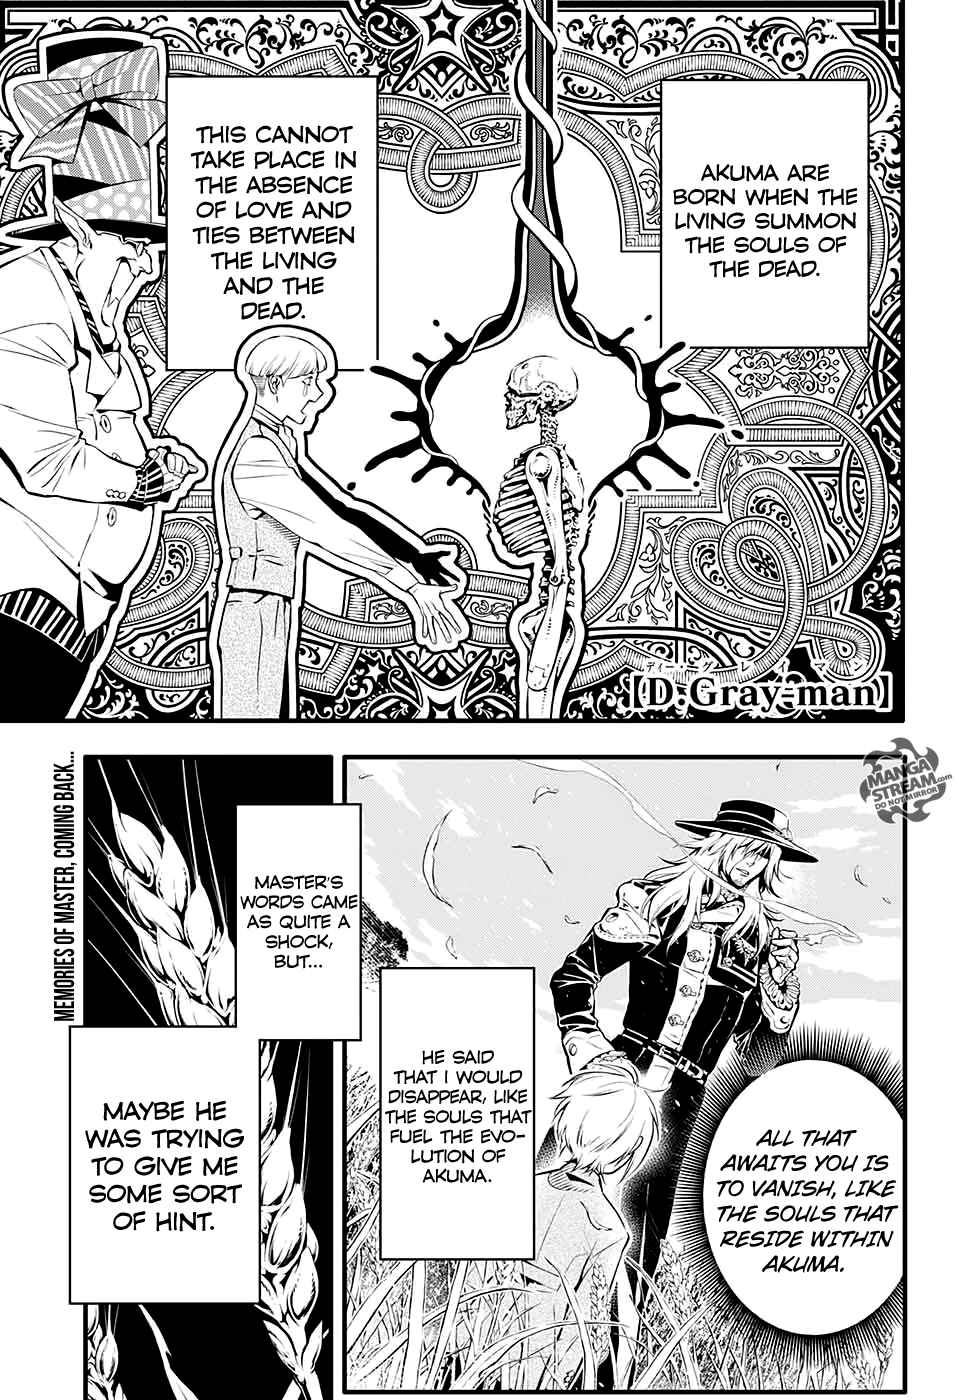 D.Gray-man chapter 226 page 3